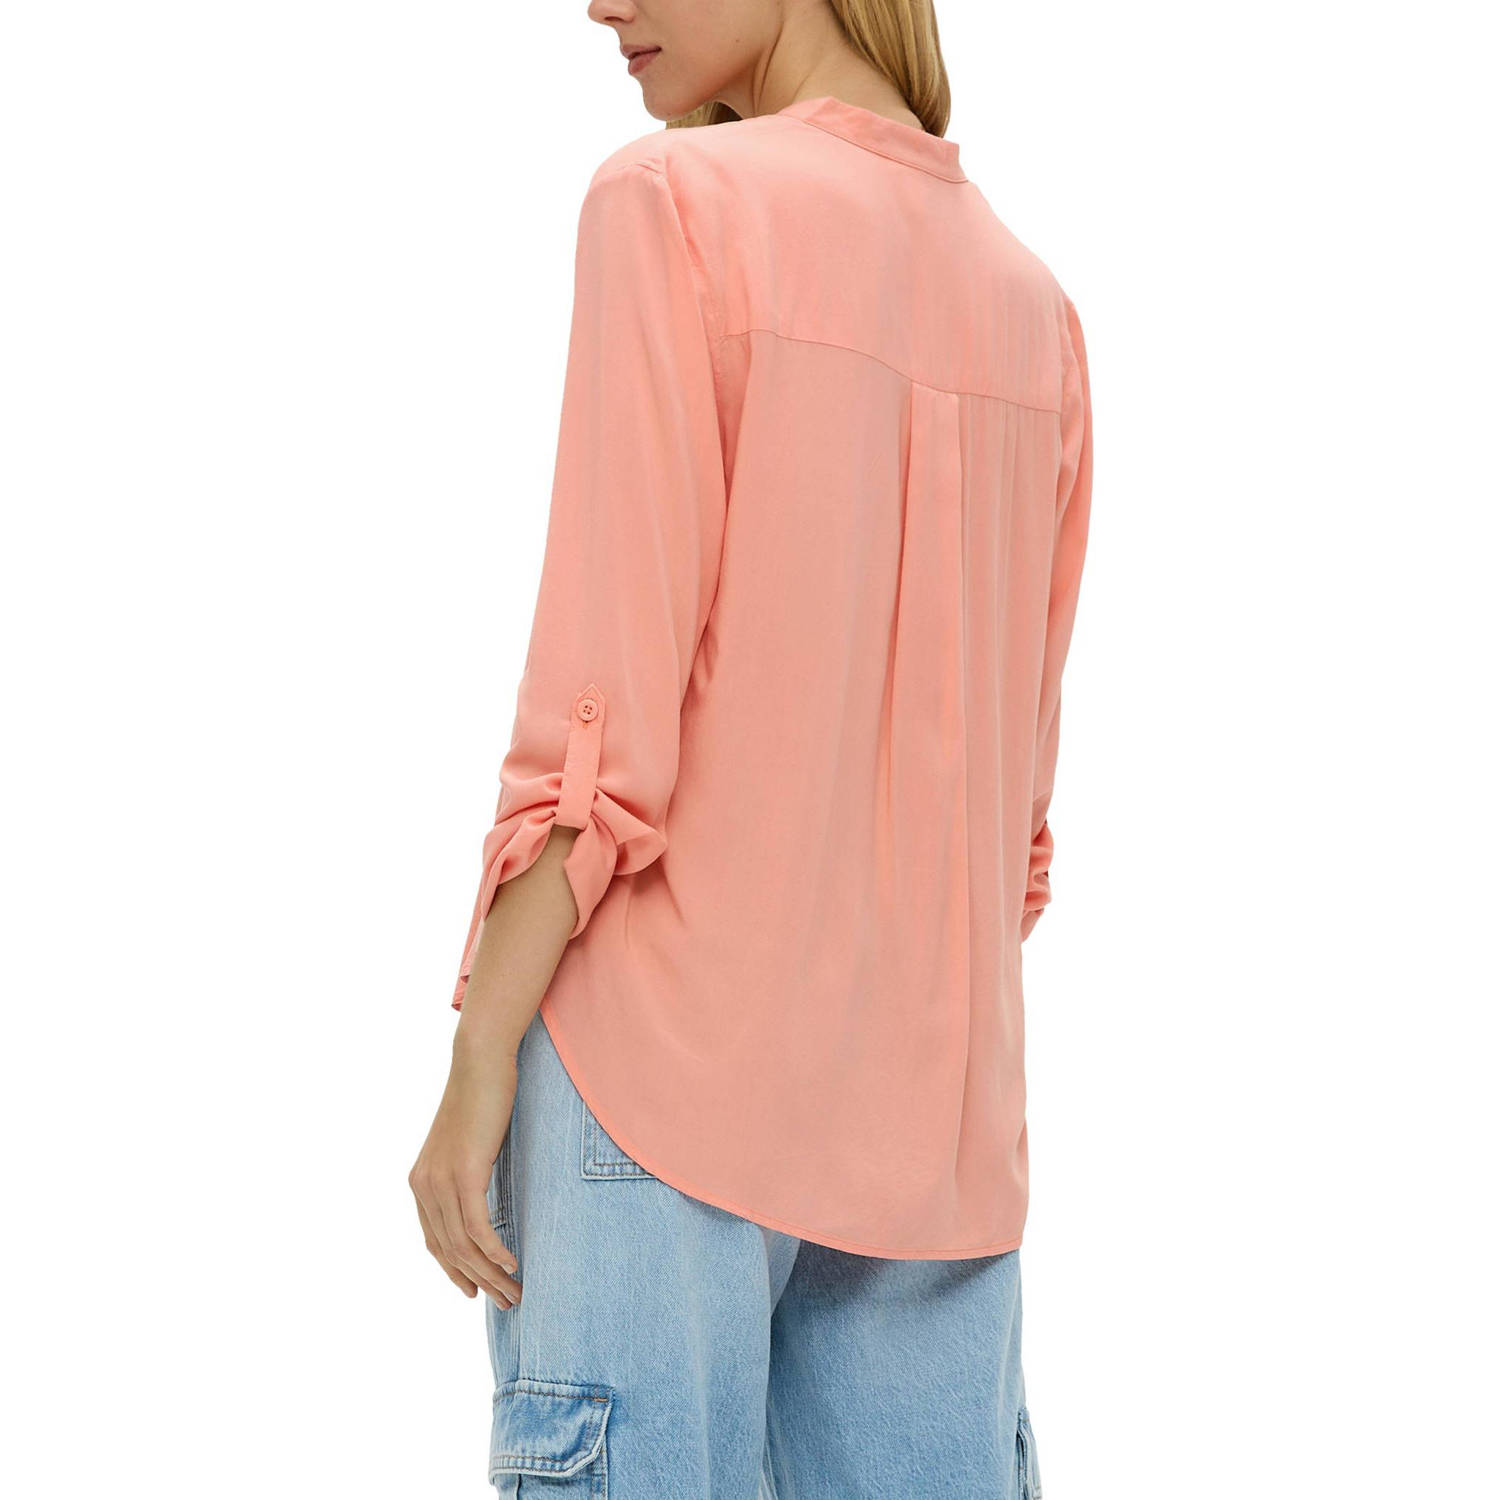 Q S by s.Oliver blouse zalm